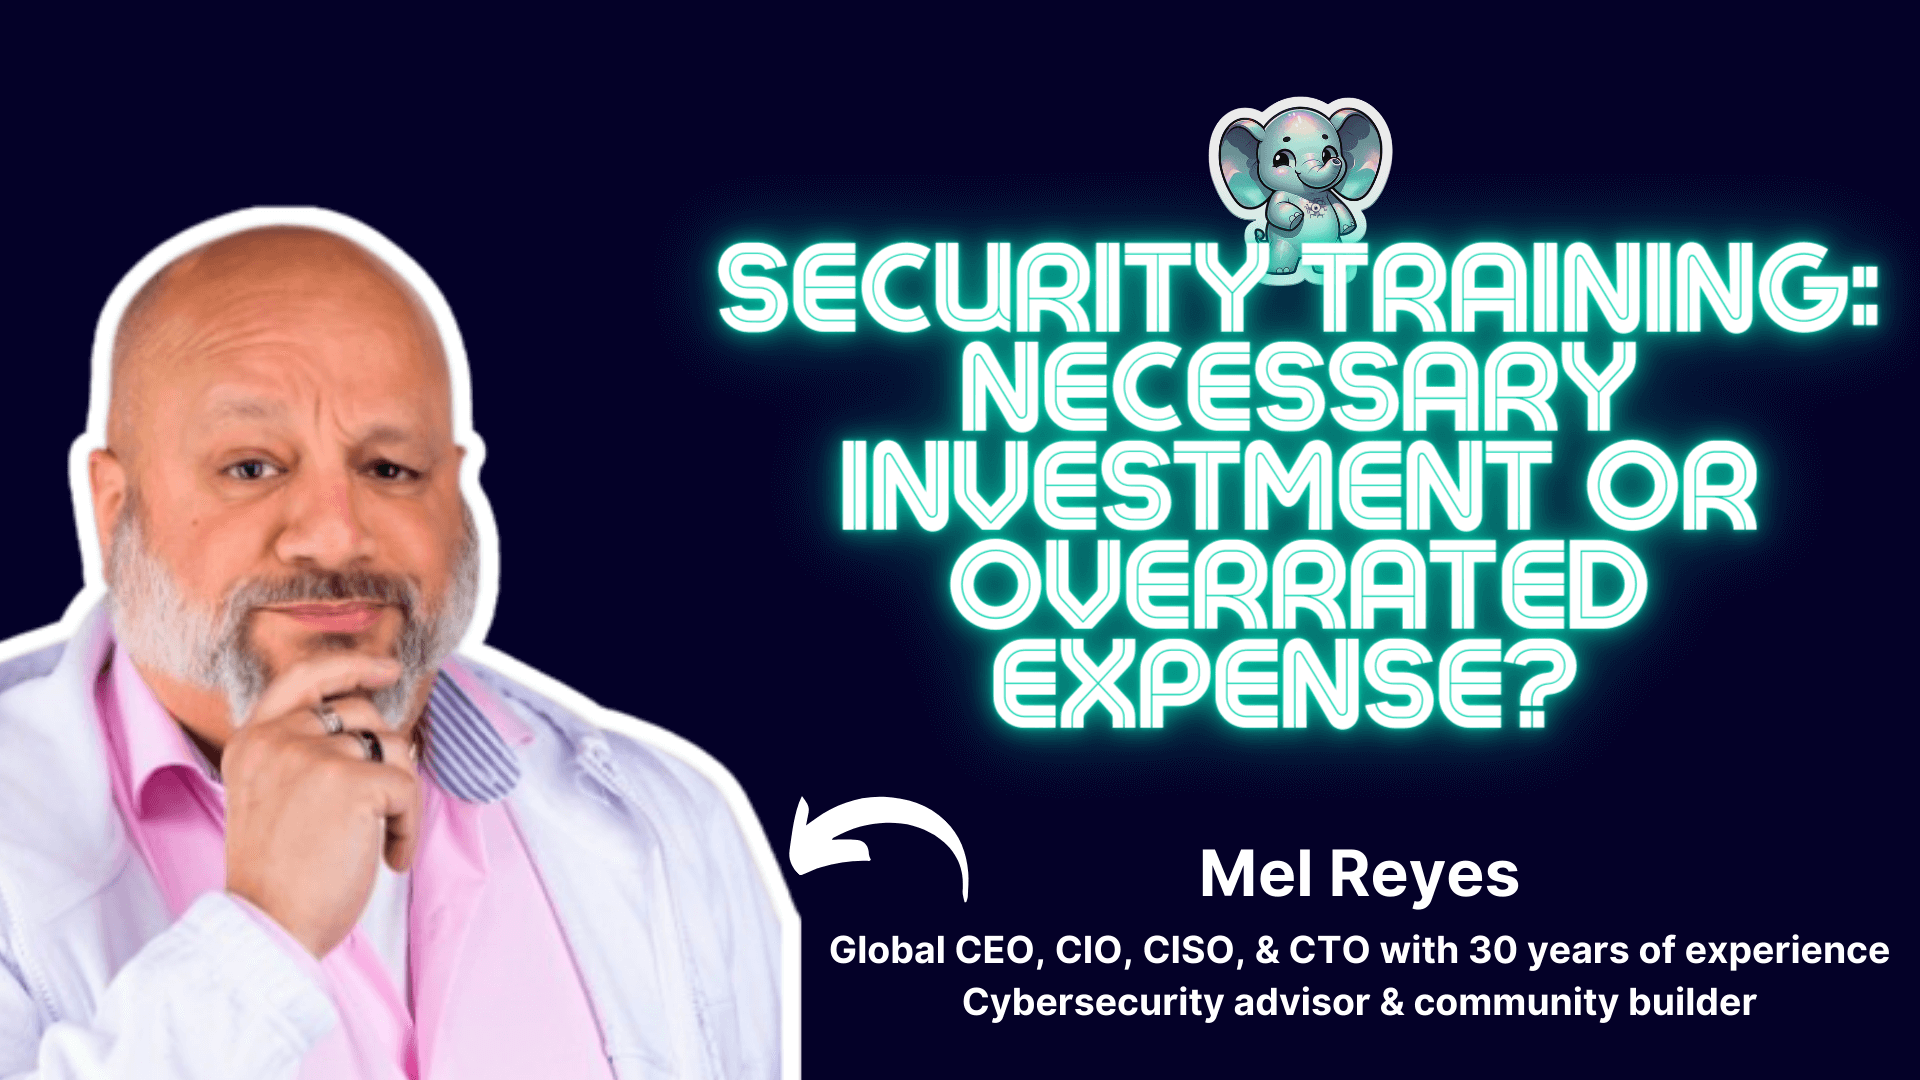 Security training: Necessary investment or overrated expense?⎥Mel Reyes (Global CEO, CIO, CISO, & CTO with 30 years of experience)